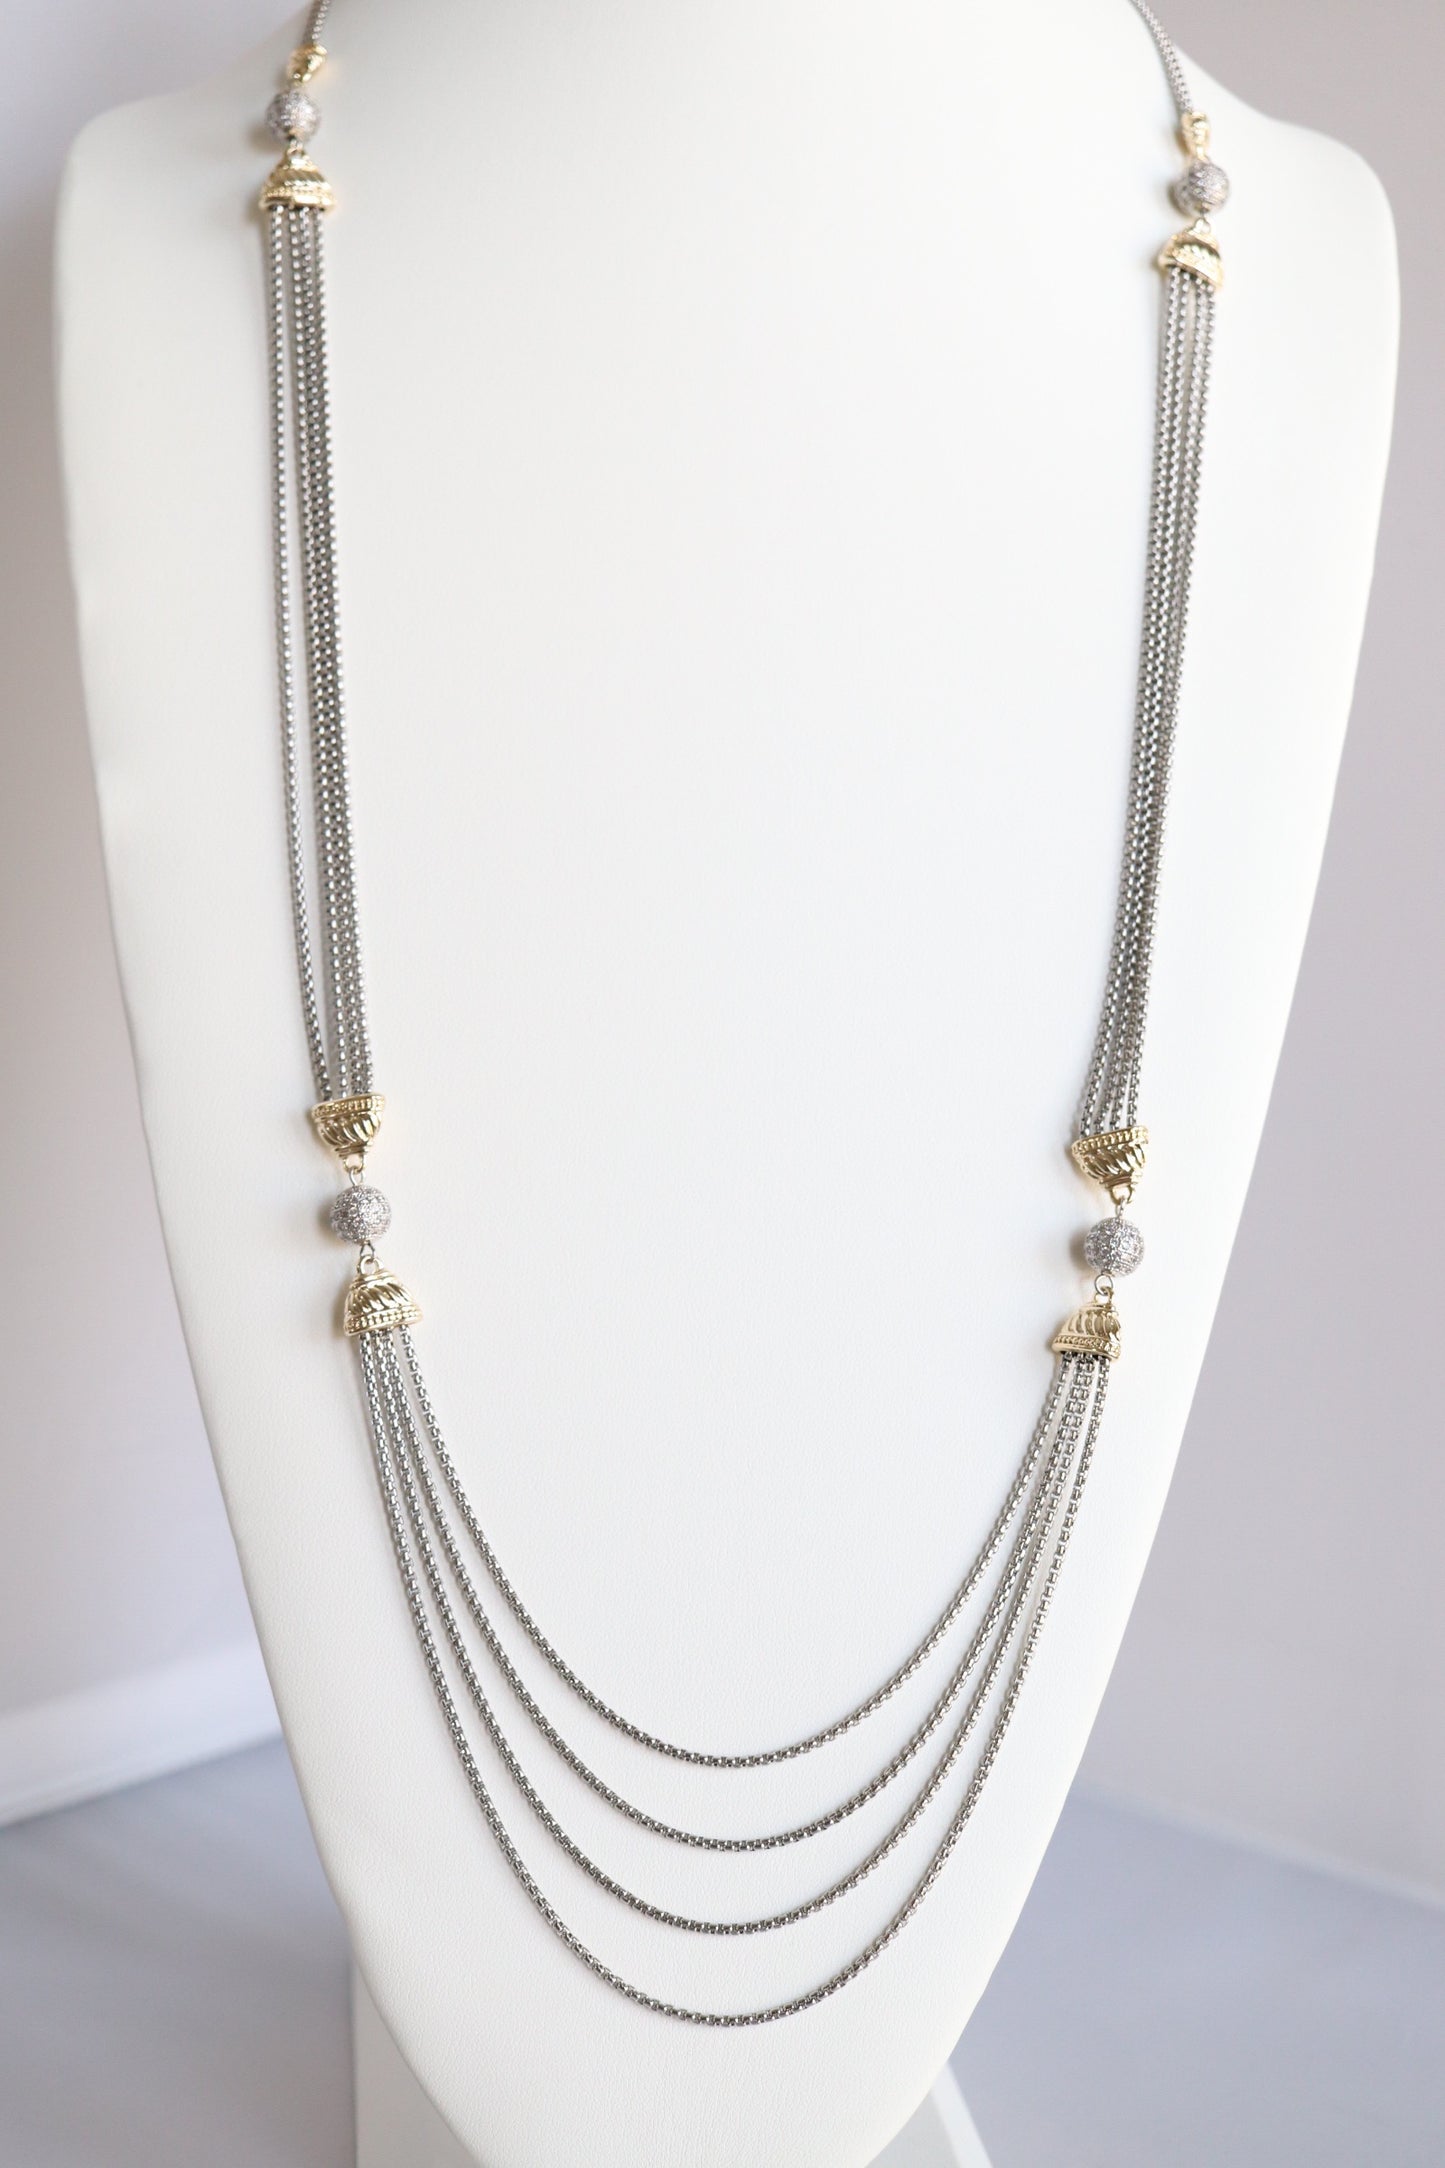 Beautiful Silver and Gold Necklace